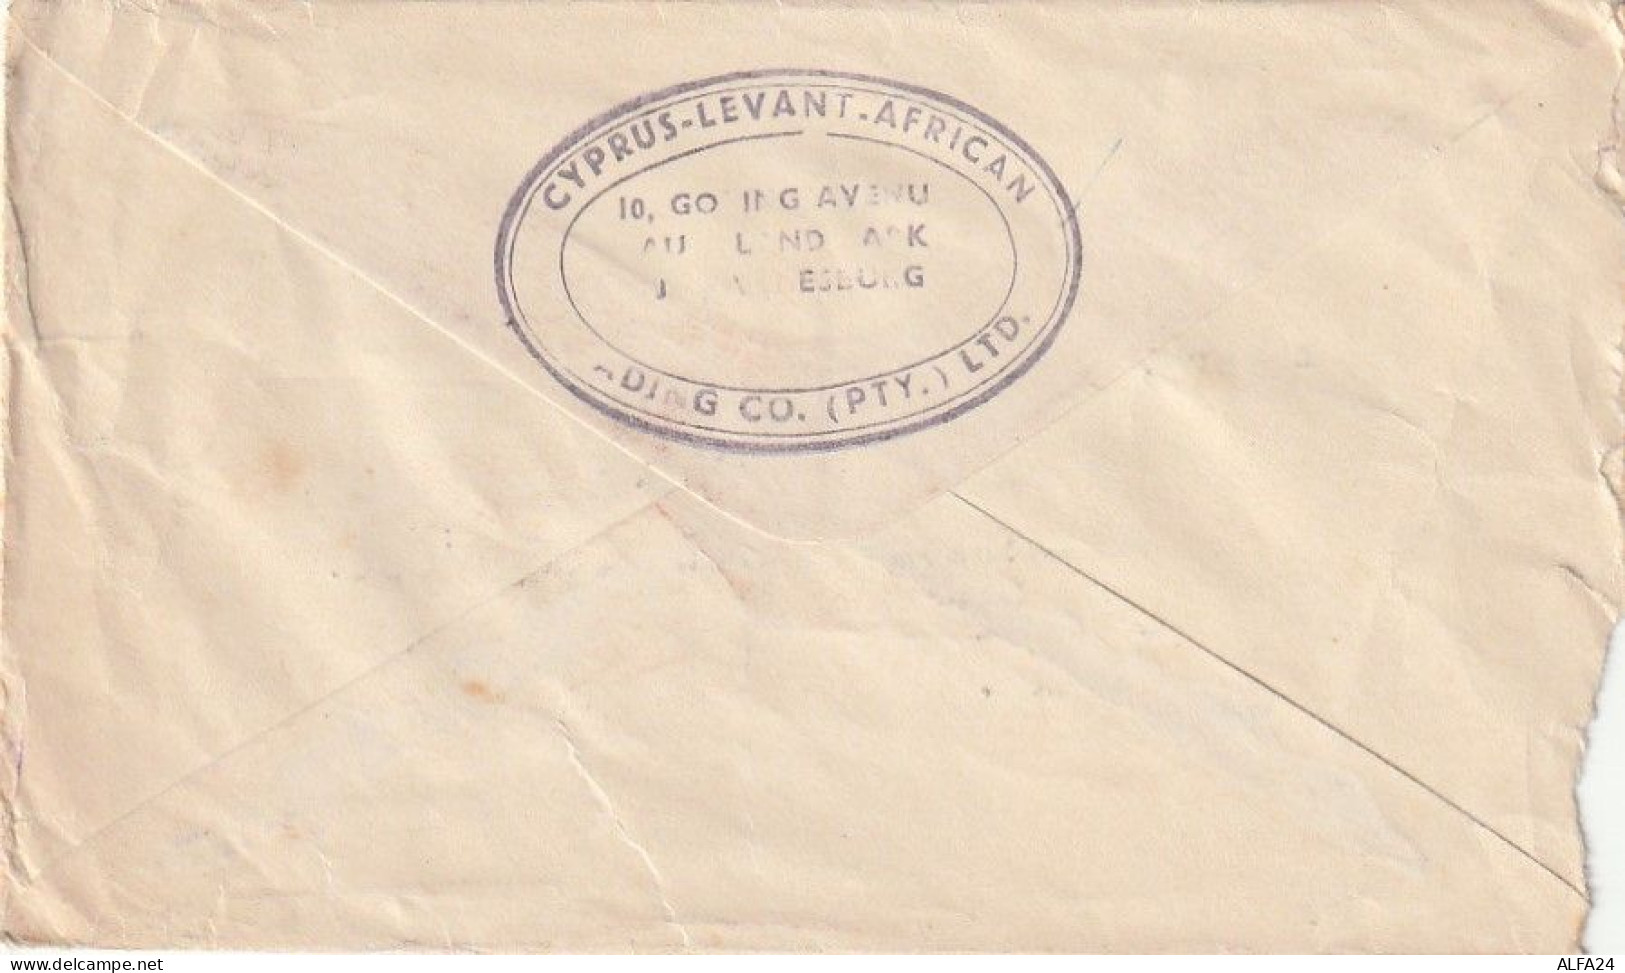 LETTERA 1947 SOUTH AFRICA TIMBRO JOHANNESBURG (XT3451 - Lettres & Documents